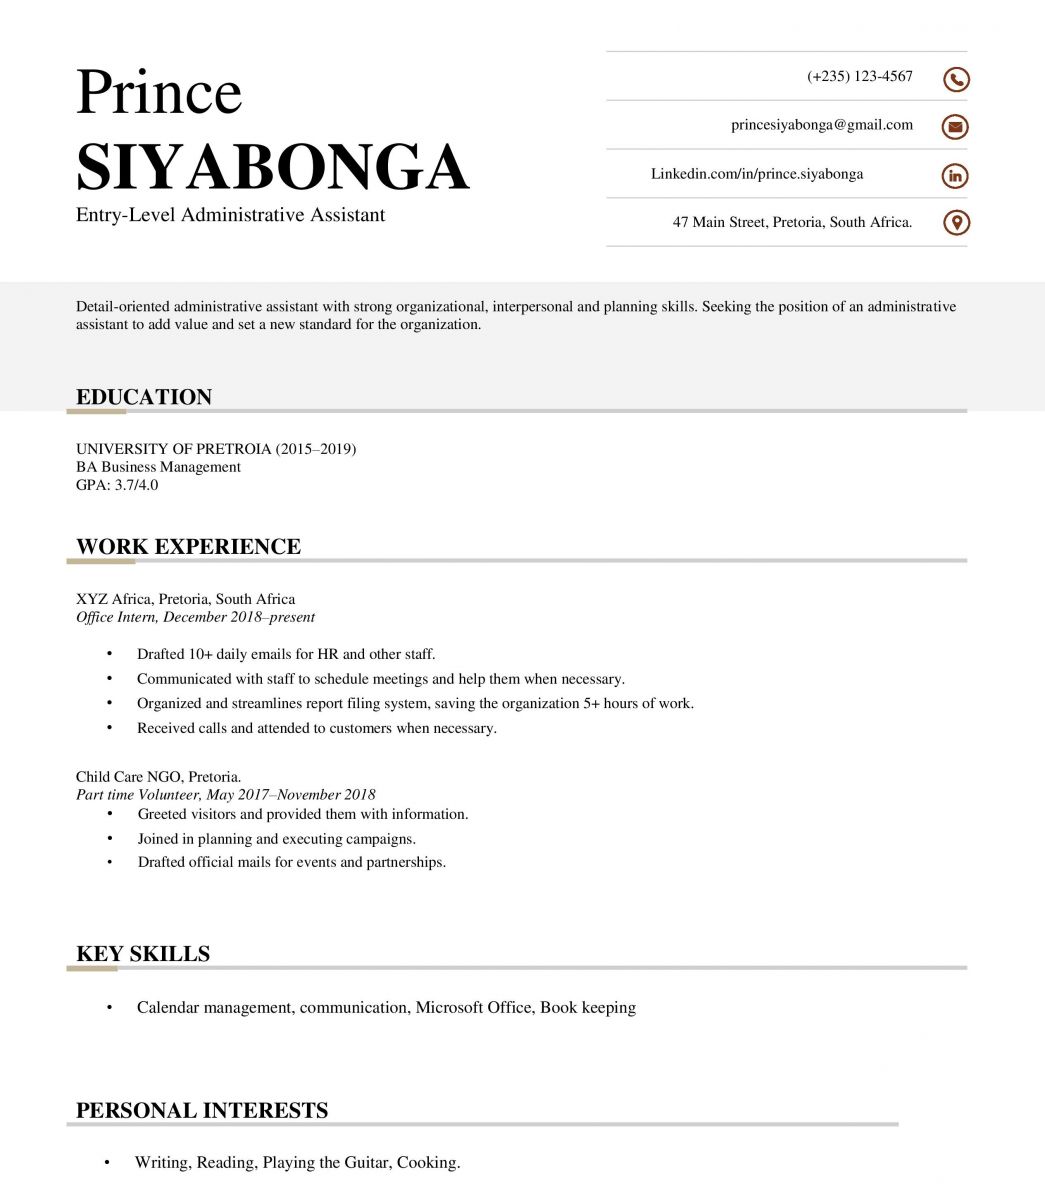 An image of an entry-level administrative CV template